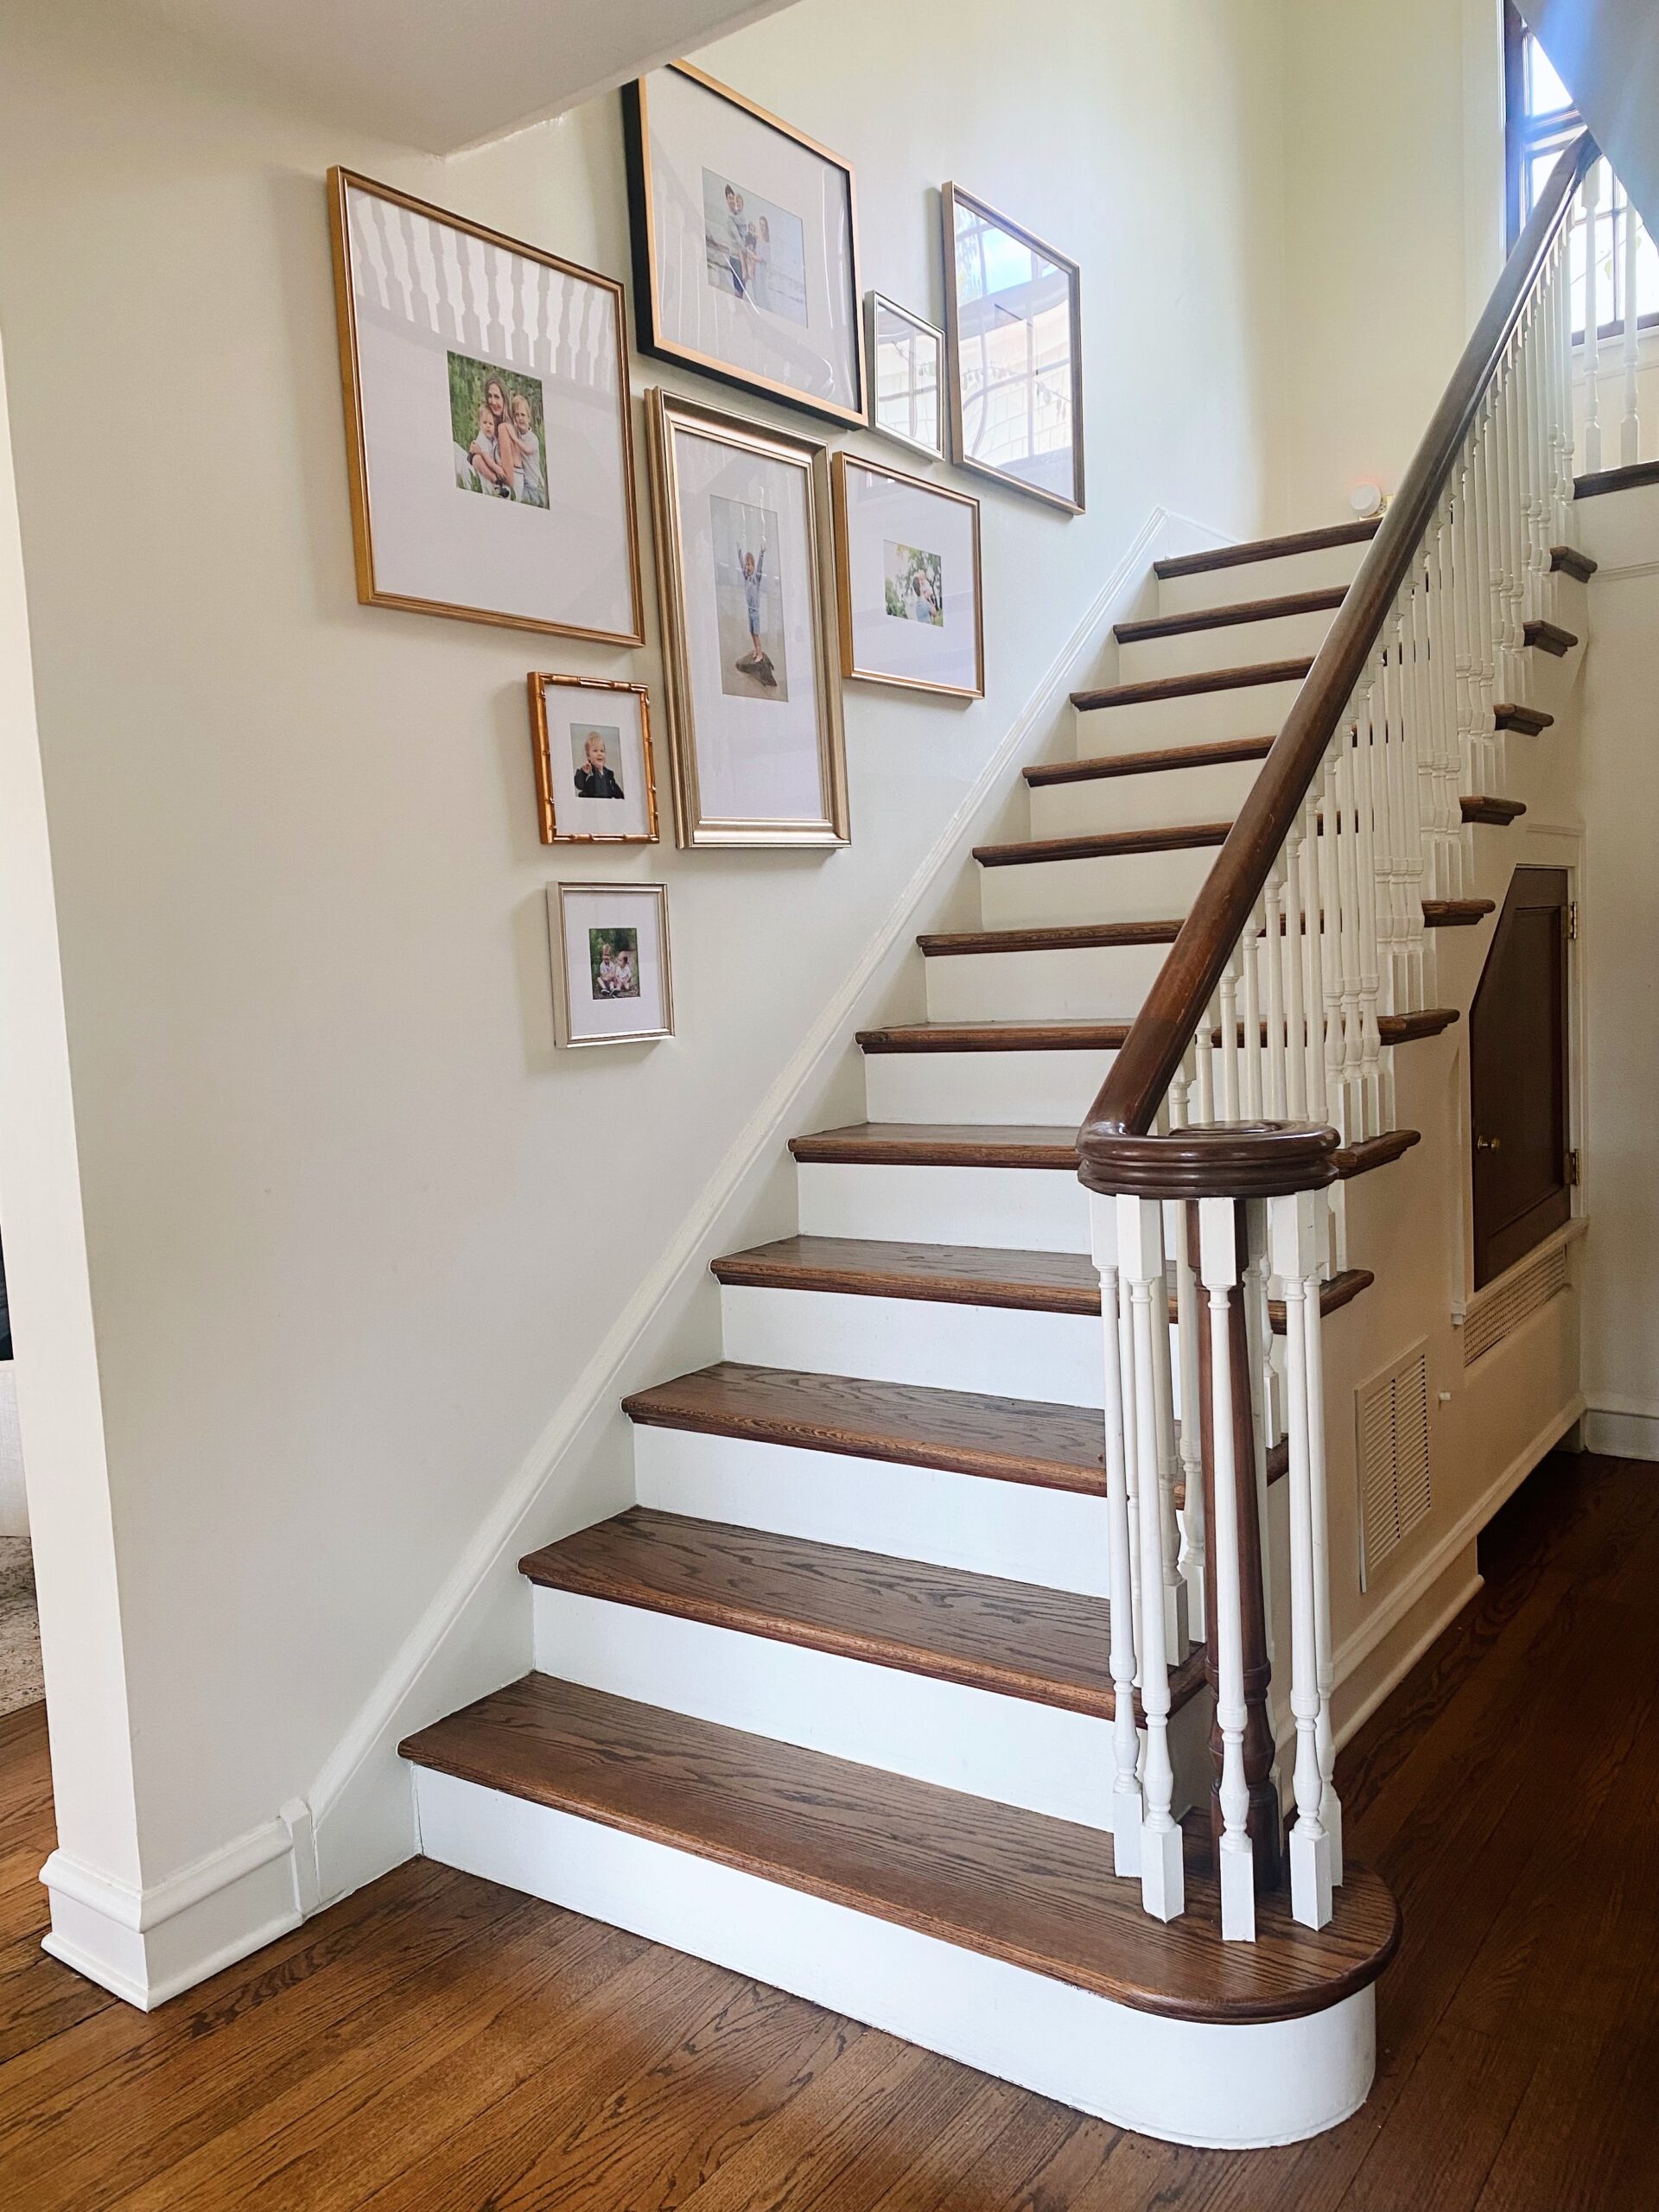 stairs without stair runner